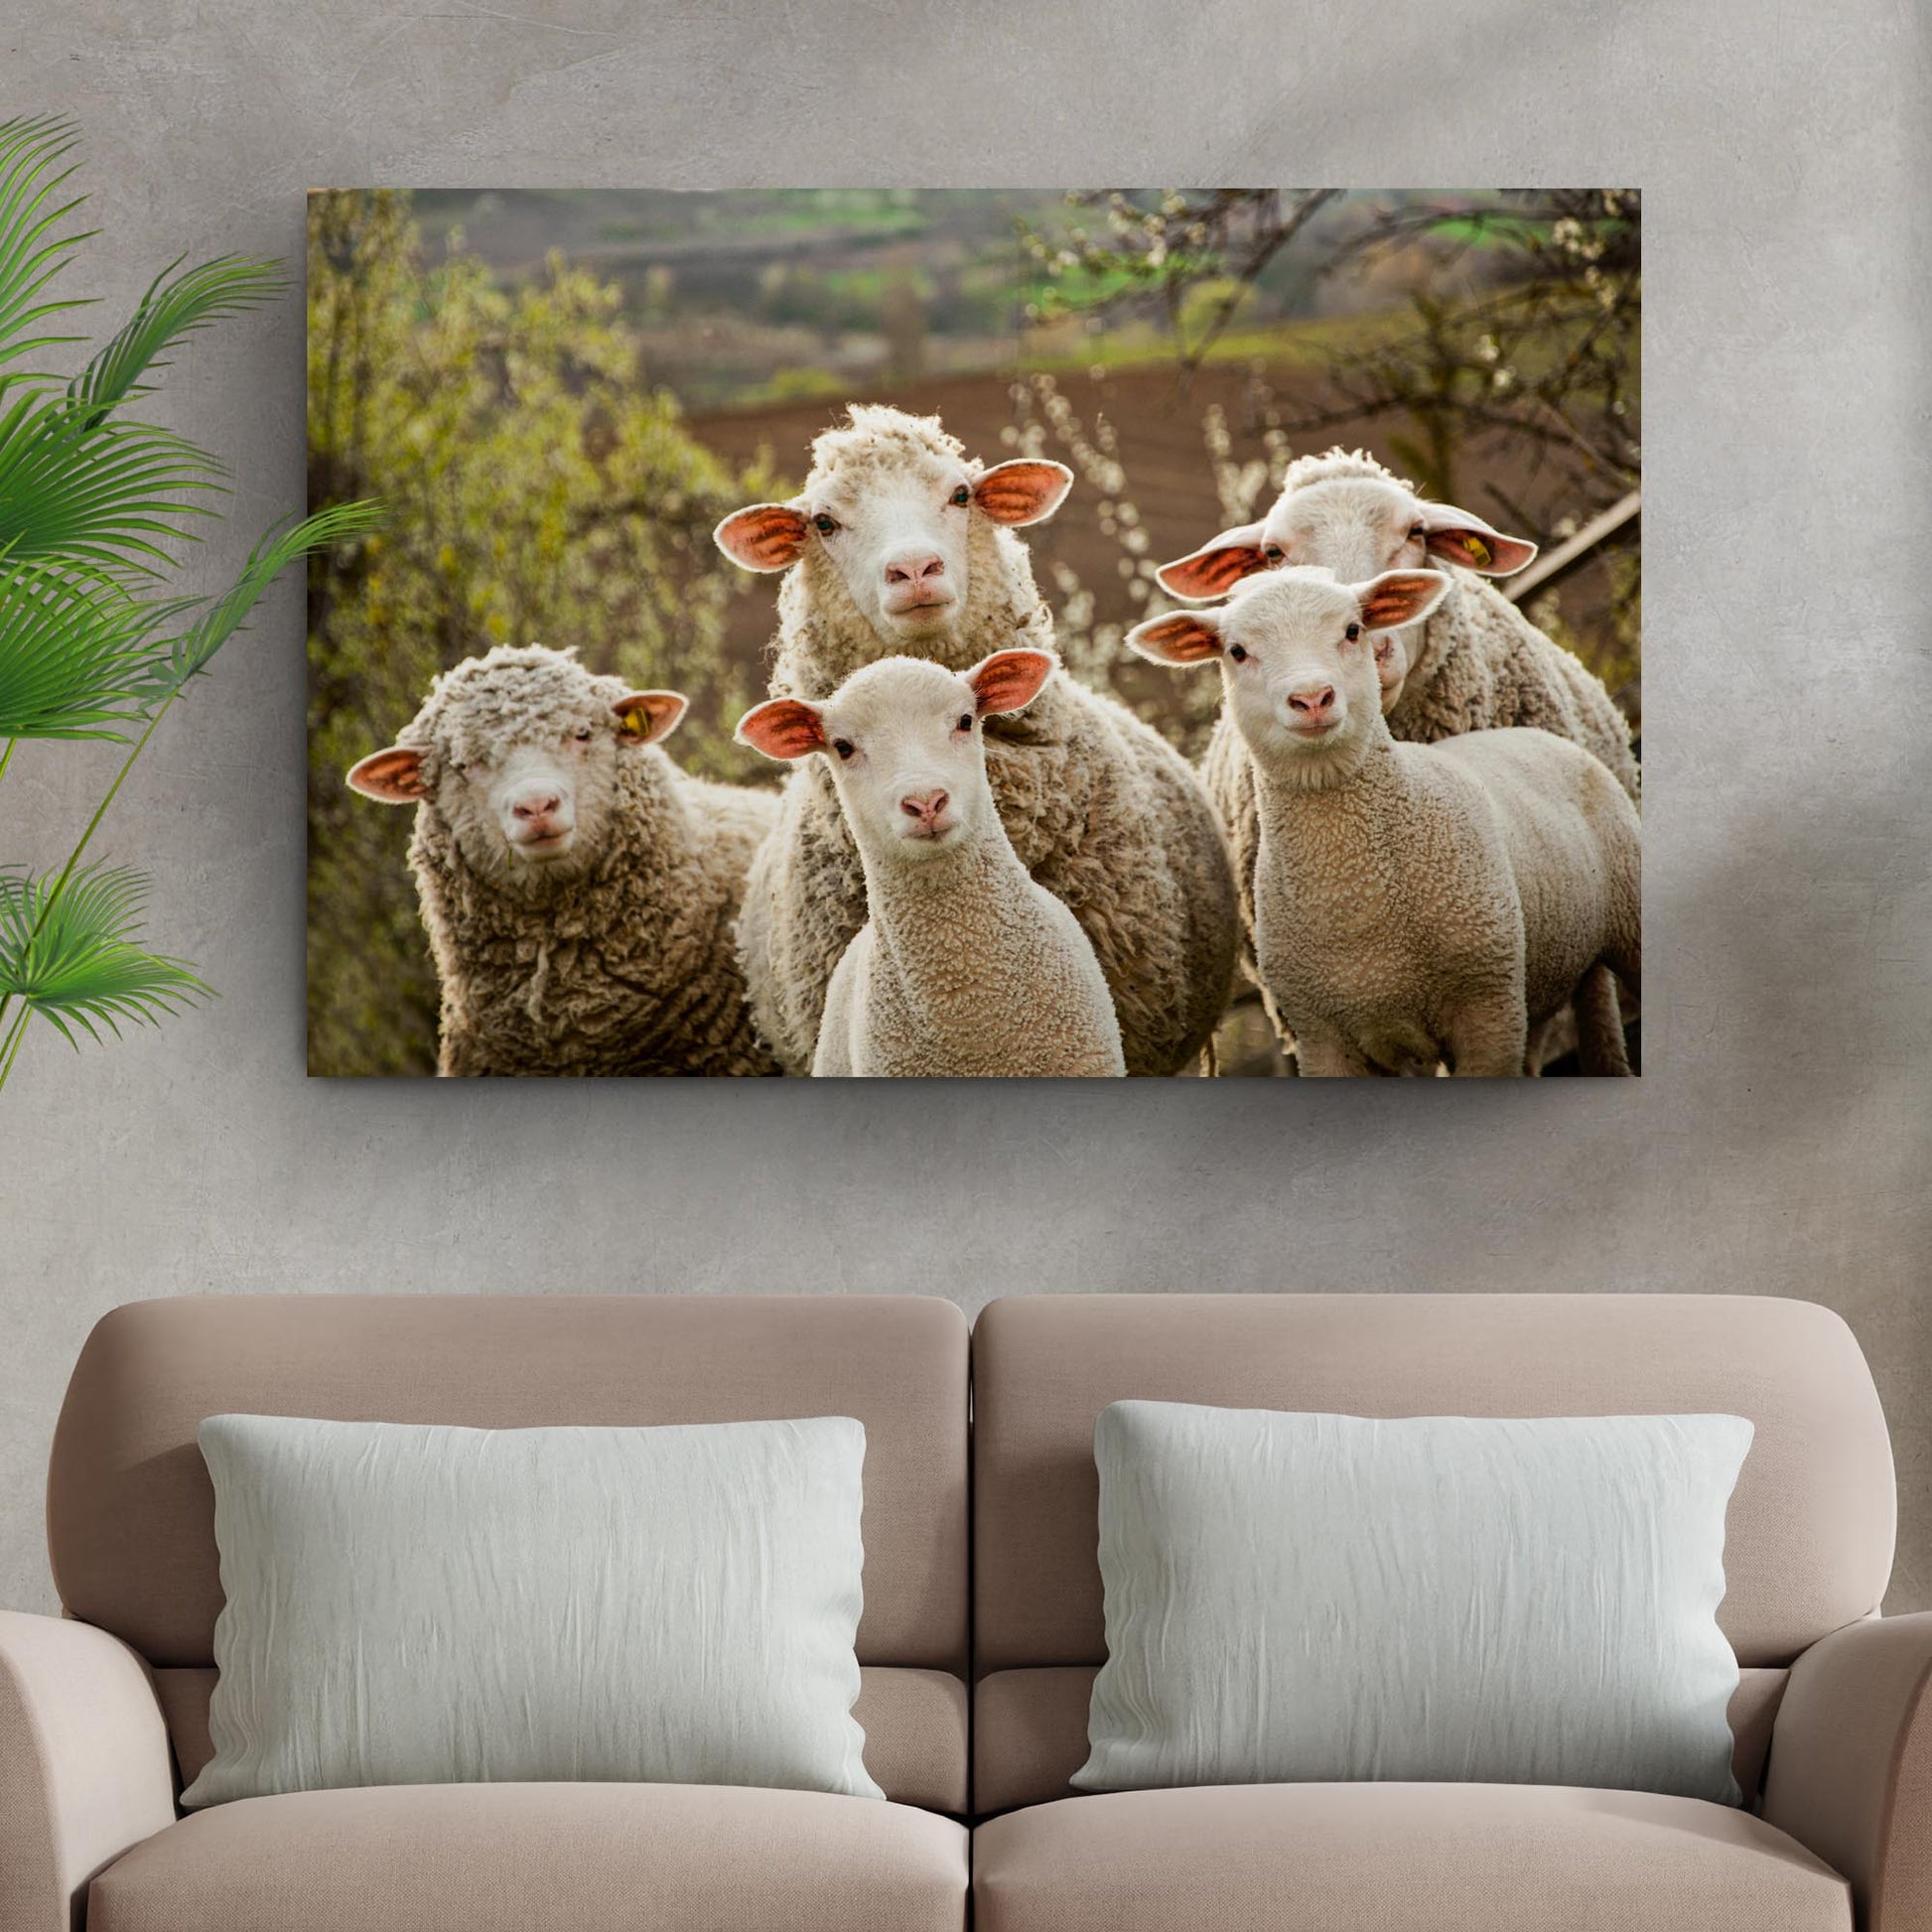 Curious Sheep Canvas Wall Art - Image by Tailored Canvases